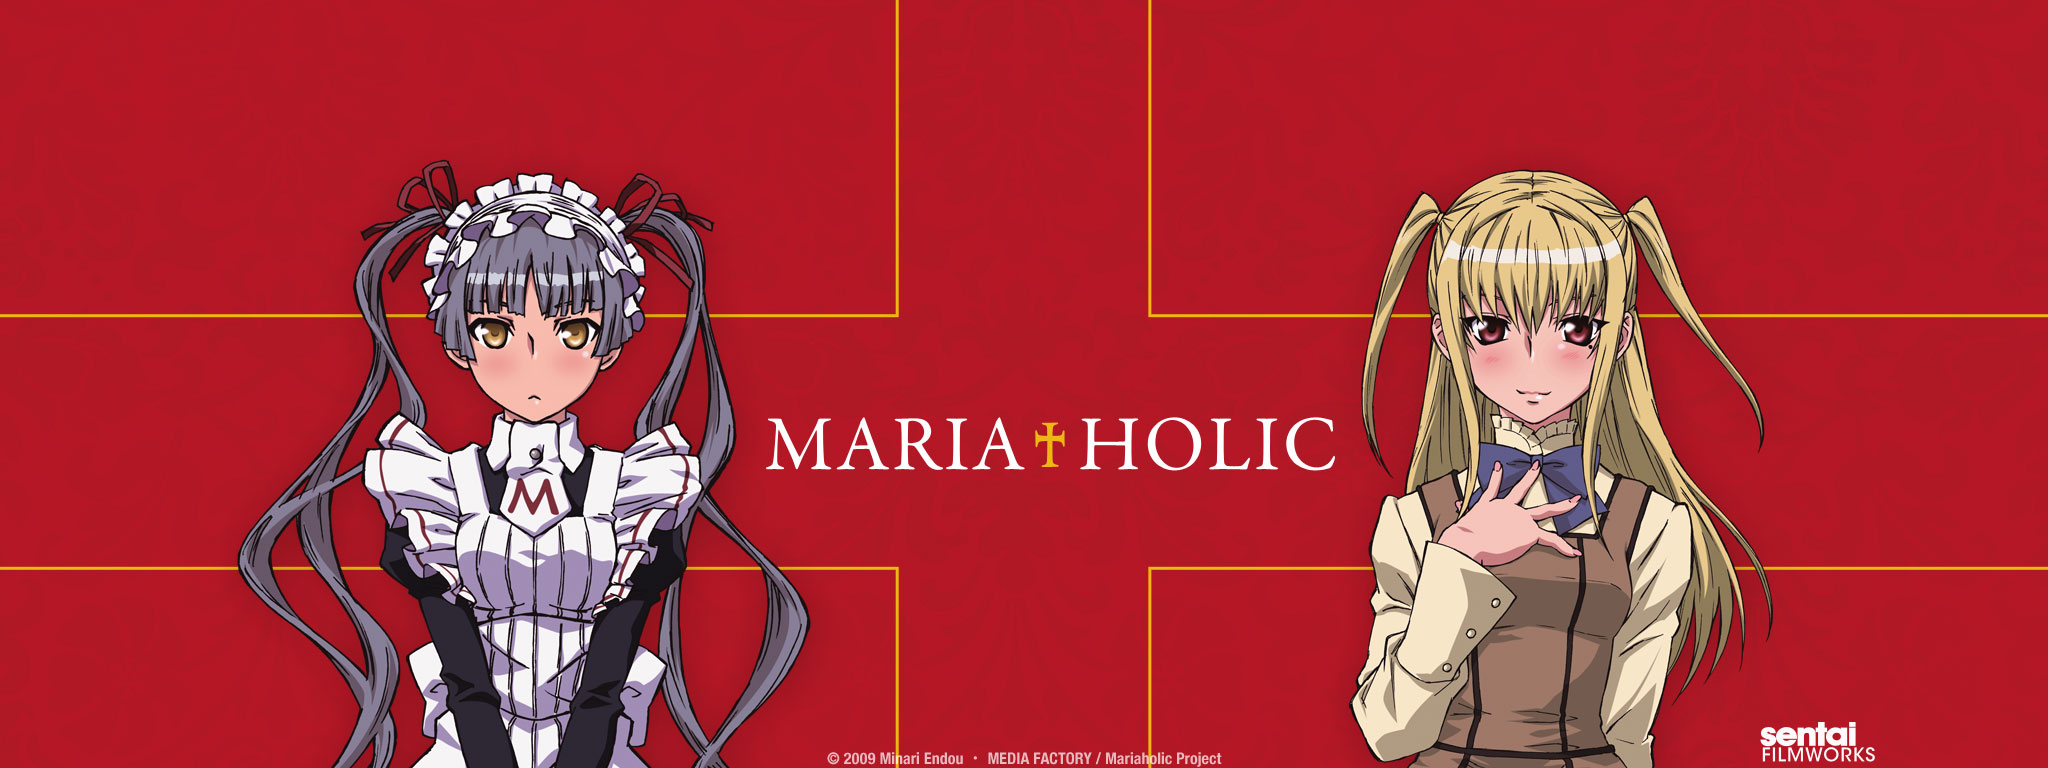 Title Art for Maria Holic